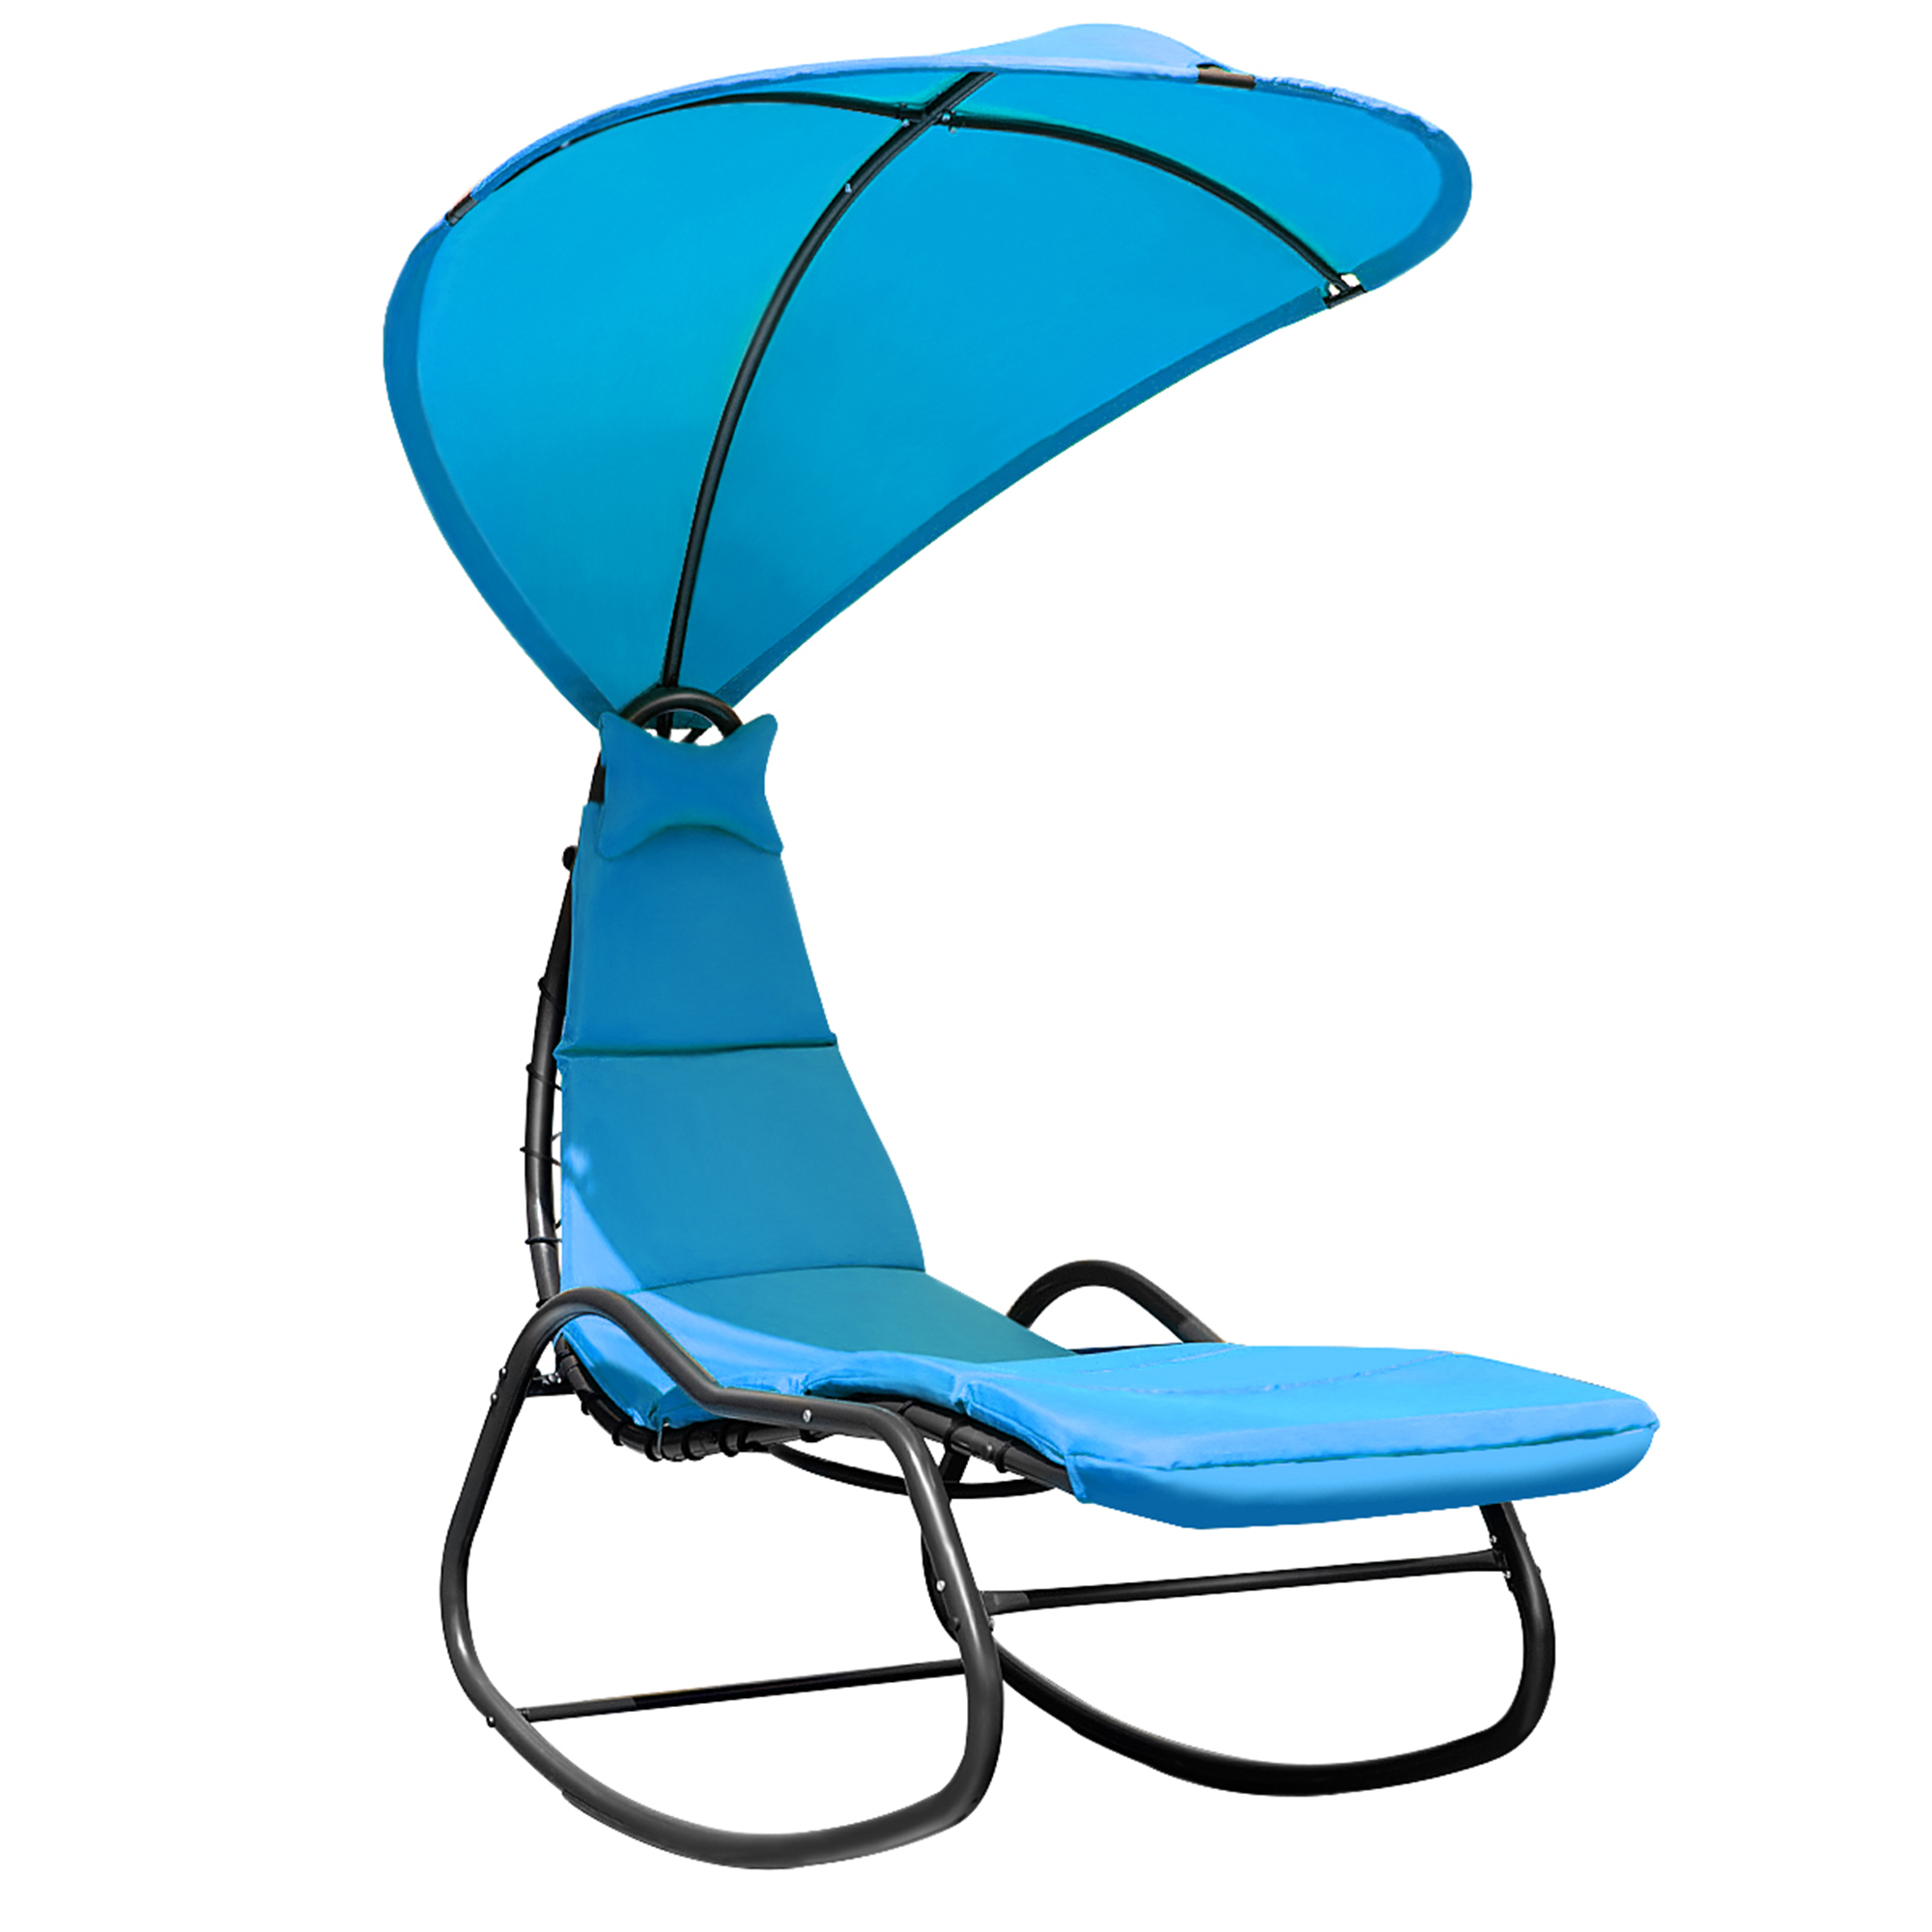 Gymax Patio Lounge Chair Chaise Garden w/ Steel Frame Cushion Canopy Turquoise - image 4 of 9